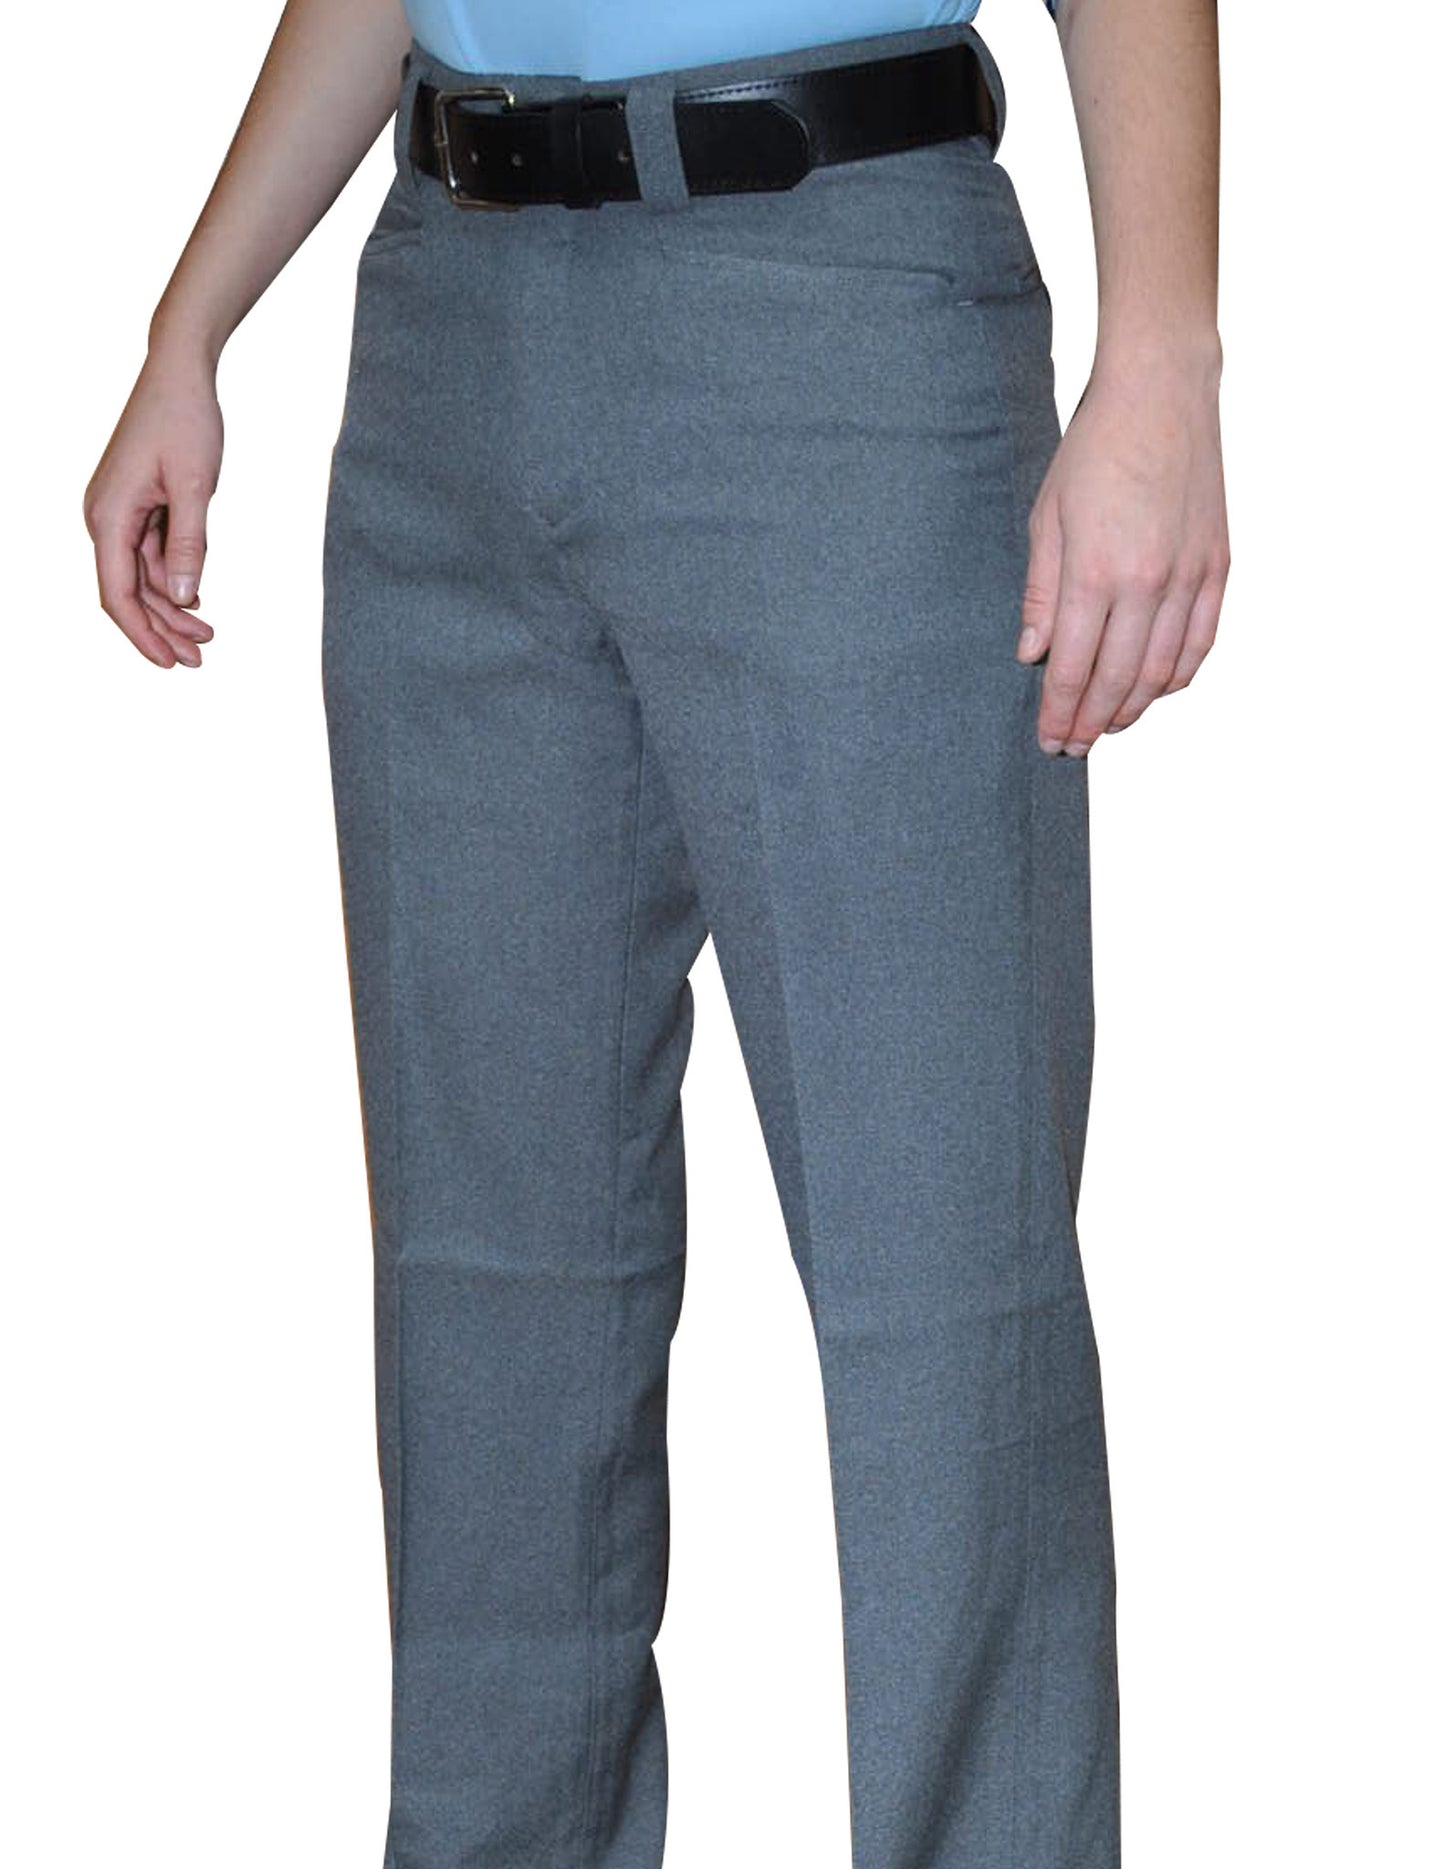 BBS379-Smitty Women's Flat Front Combo Pants-Heather Grey Only